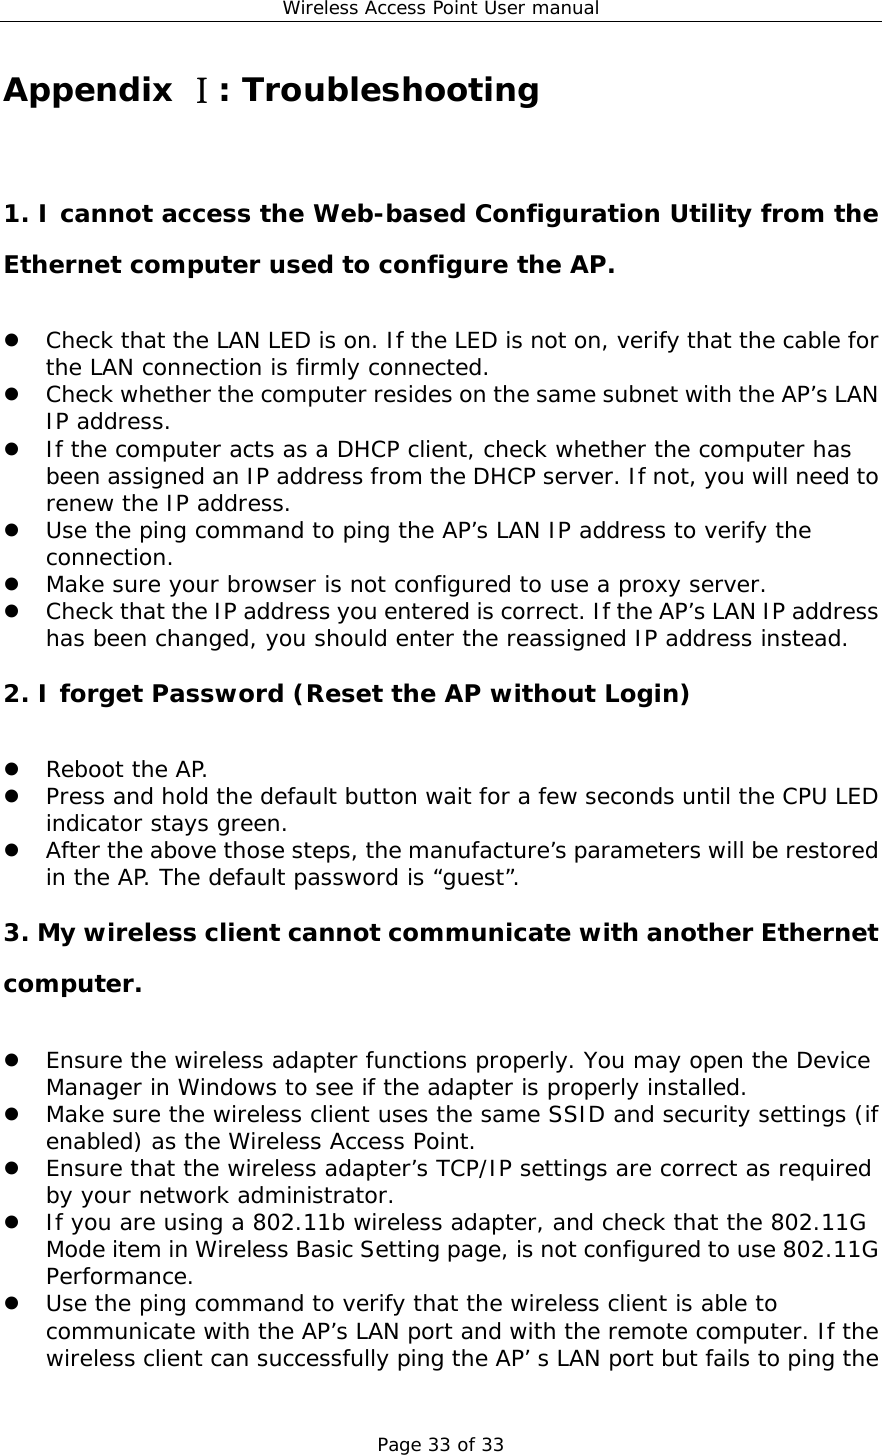 Wireless Access Point User manual Page 33 of 33 Appendix : TroubleshootingⅠ 1. I cannot access the Web-based Configuration Utility from the Ethernet computer used to configure the AP.   Check that the LAN LED is on. If the LED is not on, verify that the cable for the LAN connection is firmly connected.   Check whether the computer resides on the same subnet with the AP’s LAN IP address.   If the computer acts as a DHCP client, check whether the computer has been assigned an IP address from the DHCP server. If not, you will need to renew the IP address.    Use the ping command to ping the AP’s LAN IP address to verify the connection.   Make sure your browser is not configured to use a proxy server.   Check that the IP address you entered is correct. If the AP’s LAN IP address has been changed, you should enter the reassigned IP address instead. 2. I forget Password (Reset the AP without Login)   Reboot the AP.   Press and hold the default button wait for a few seconds until the CPU LED indicator stays green.   After the above those steps, the manufacture’s parameters will be restored in the AP. The default password is “guest”. 3. My wireless client cannot communicate with another Ethernet computer.   Ensure the wireless adapter functions properly. You may open the Device Manager in Windows to see if the adapter is properly installed.   Make sure the wireless client uses the same SSID and security settings (if enabled) as the Wireless Access Point.   Ensure that the wireless adapter’s TCP/IP settings are correct as required by your network administrator.   If you are using a 802.11b wireless adapter, and check that the 802.11G Mode item in Wireless Basic Setting page, is not configured to use 802.11G Performance.   Use the ping command to verify that the wireless client is able to communicate with the AP’s LAN port and with the remote computer. If the wireless client can successfully ping the AP’ s LAN port but fails to ping the 